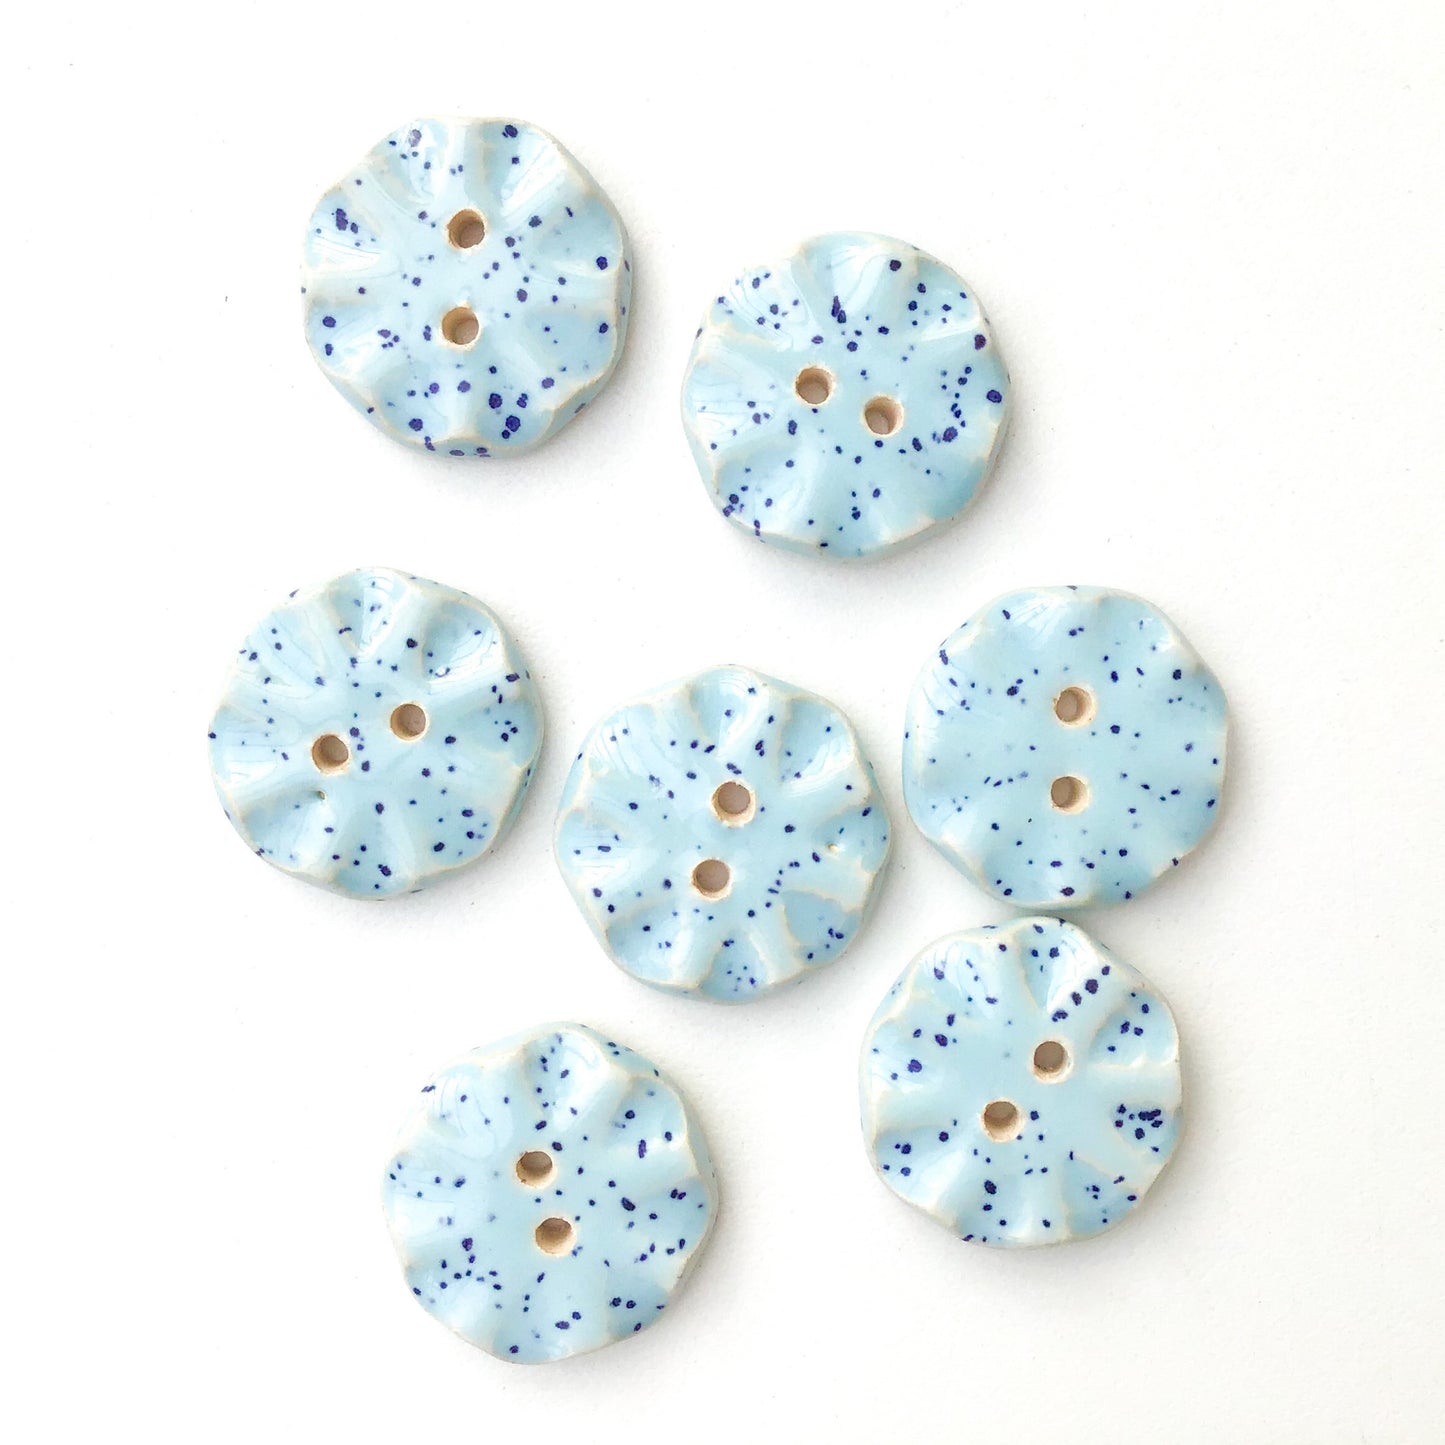 Speckled Light Blue Ceramic Buttons - Sky Blue Clay Buttons - 3/4" - 7 Pack